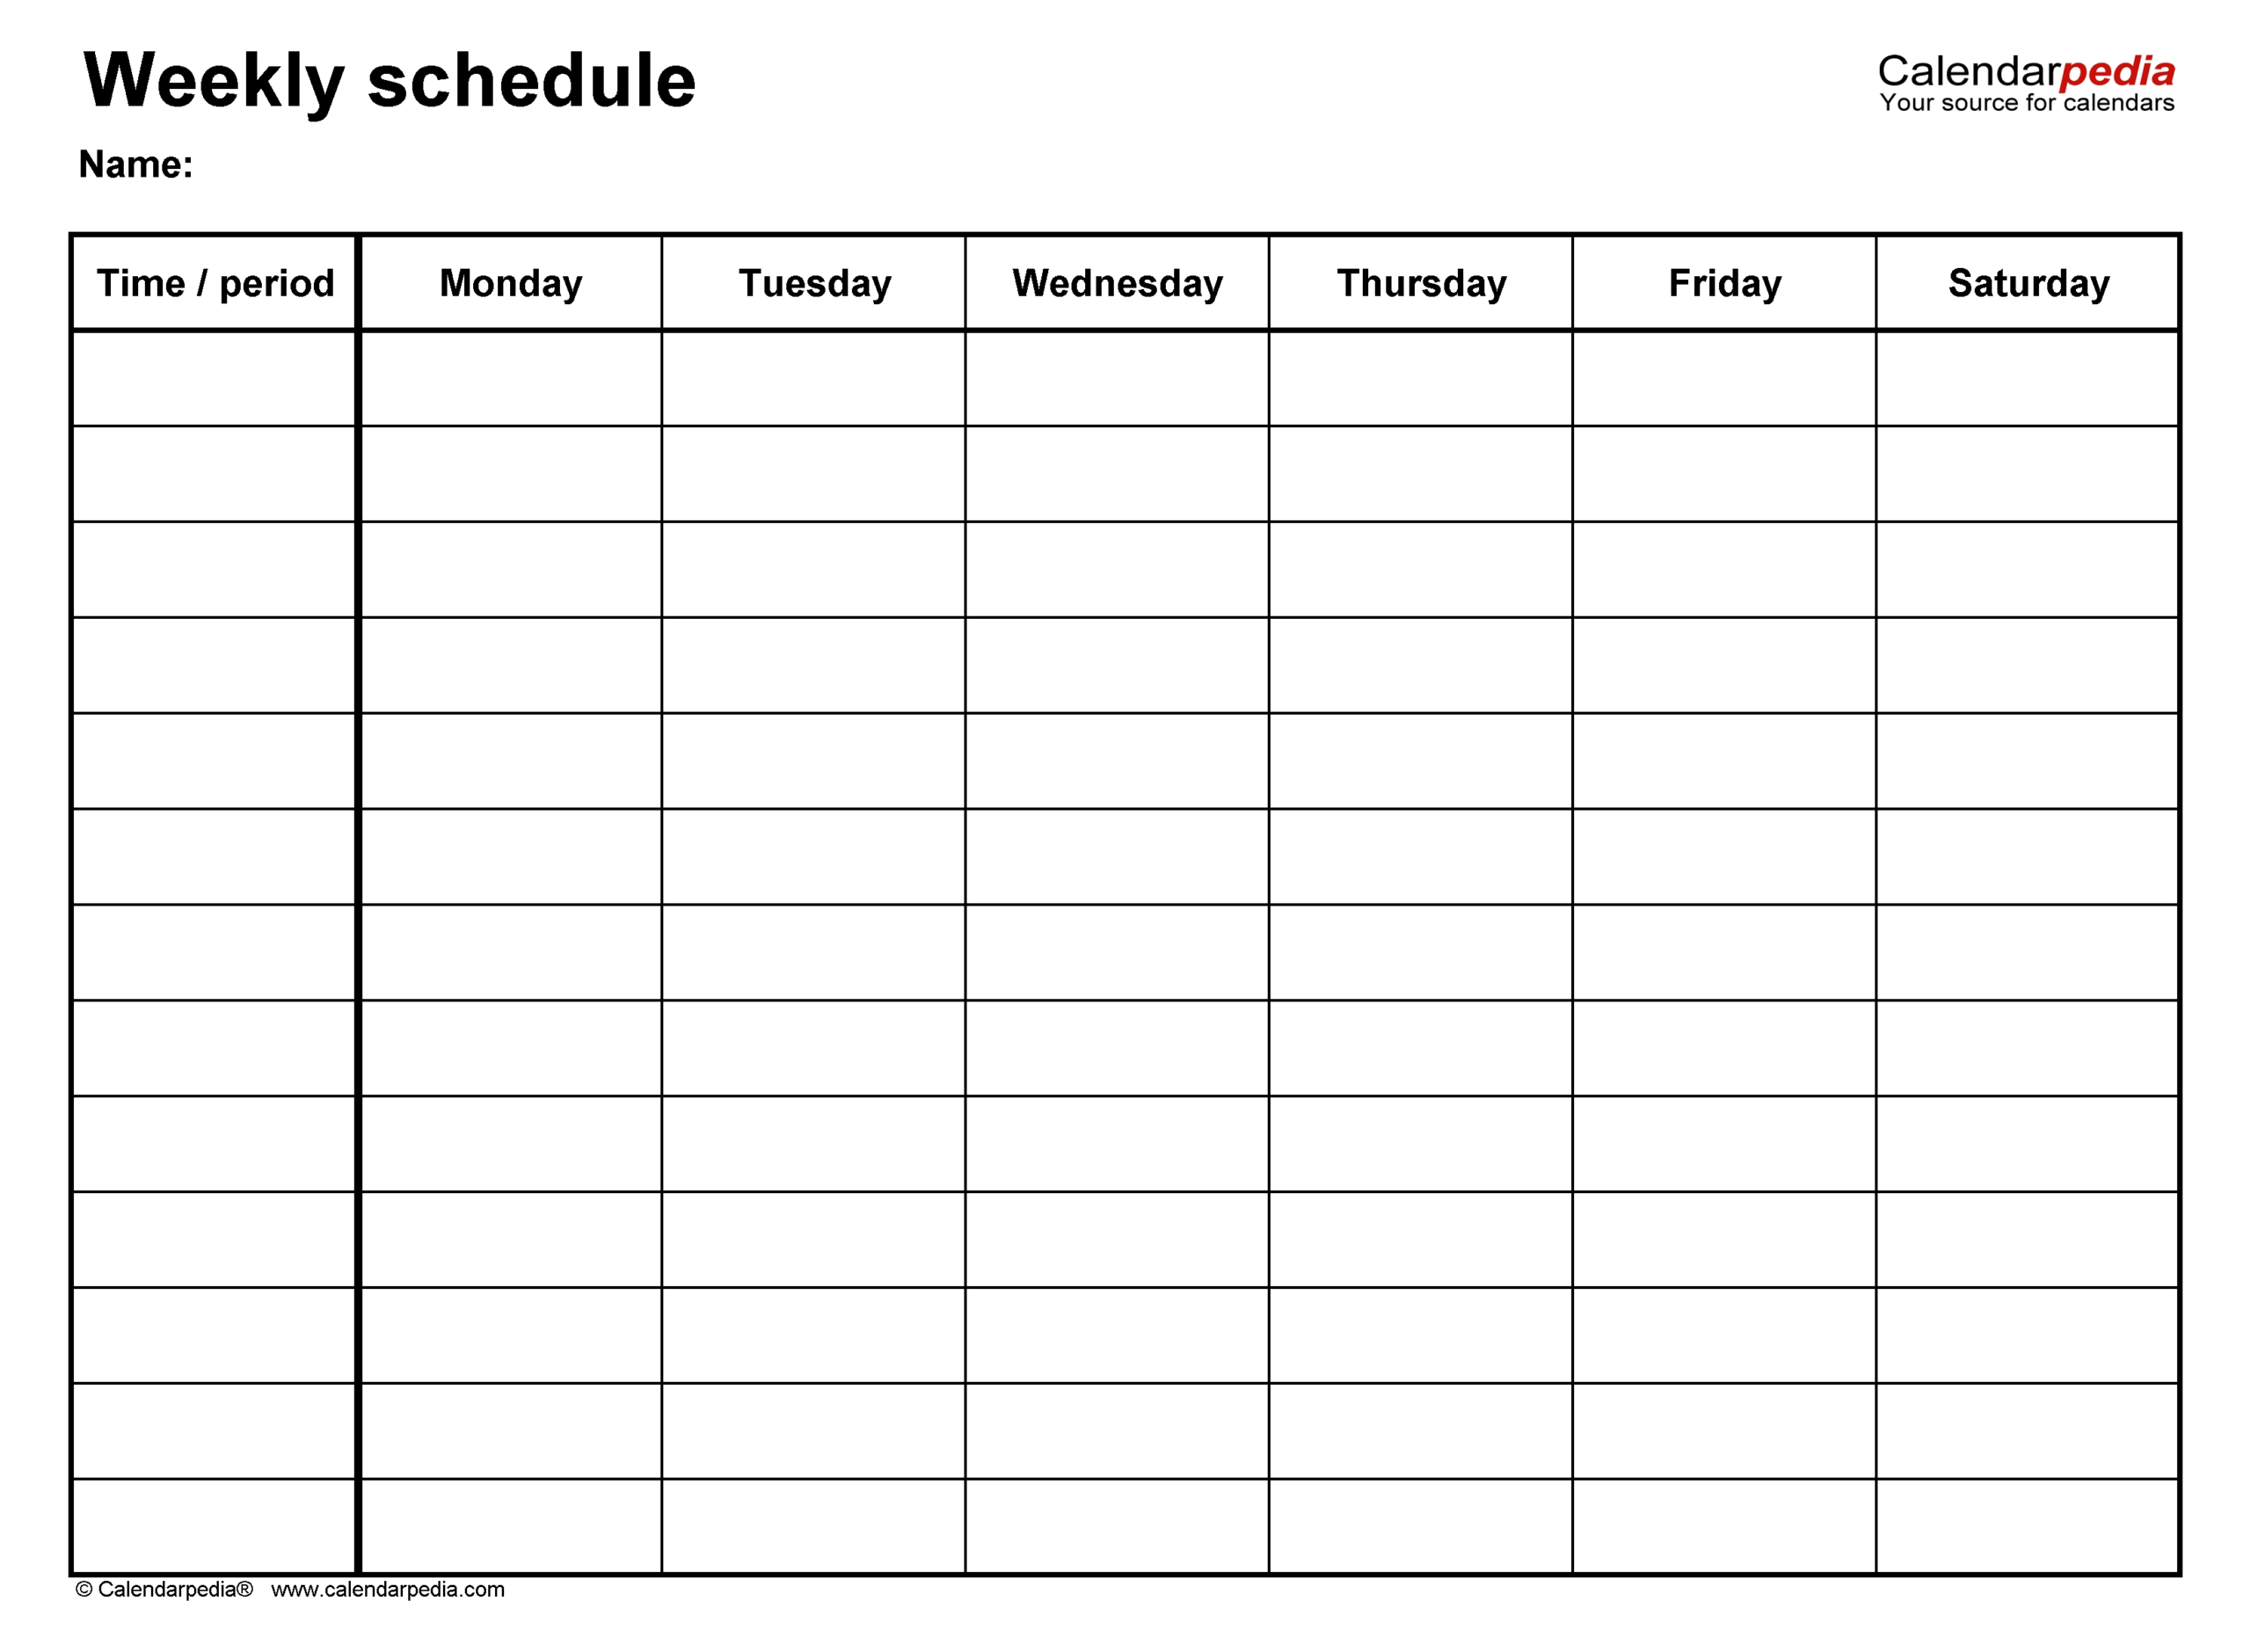 How To How To Make A Calendar In Word Monday Through Sunday  Get Your inside Monday Through Sunday Printable Calendar